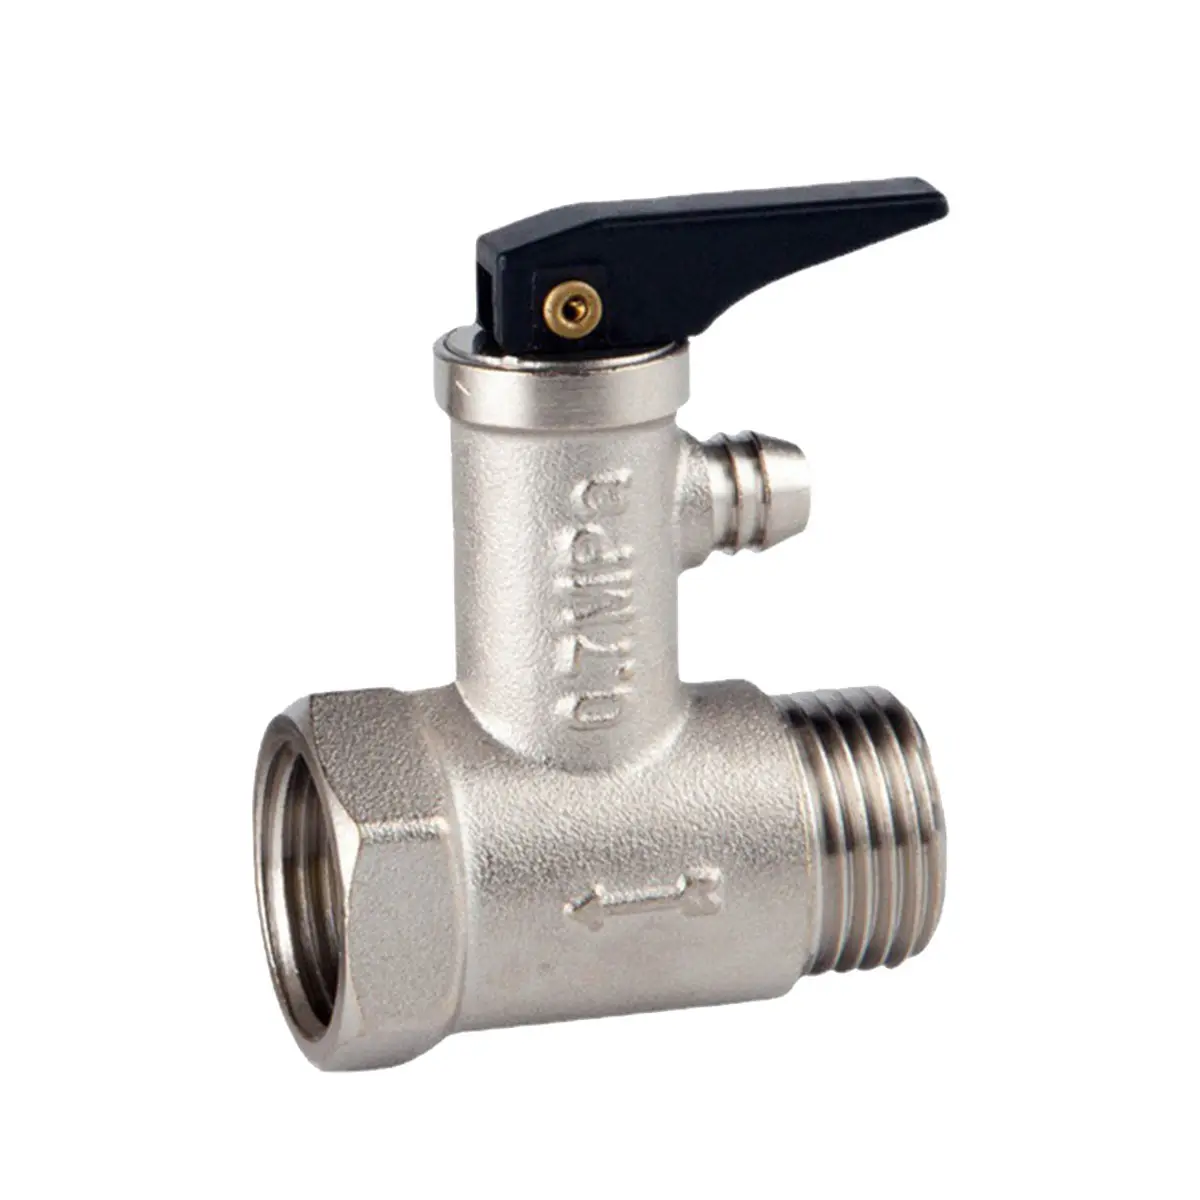 Brass safety valve  pressure relief valve for water heaters  durable product type safety valve